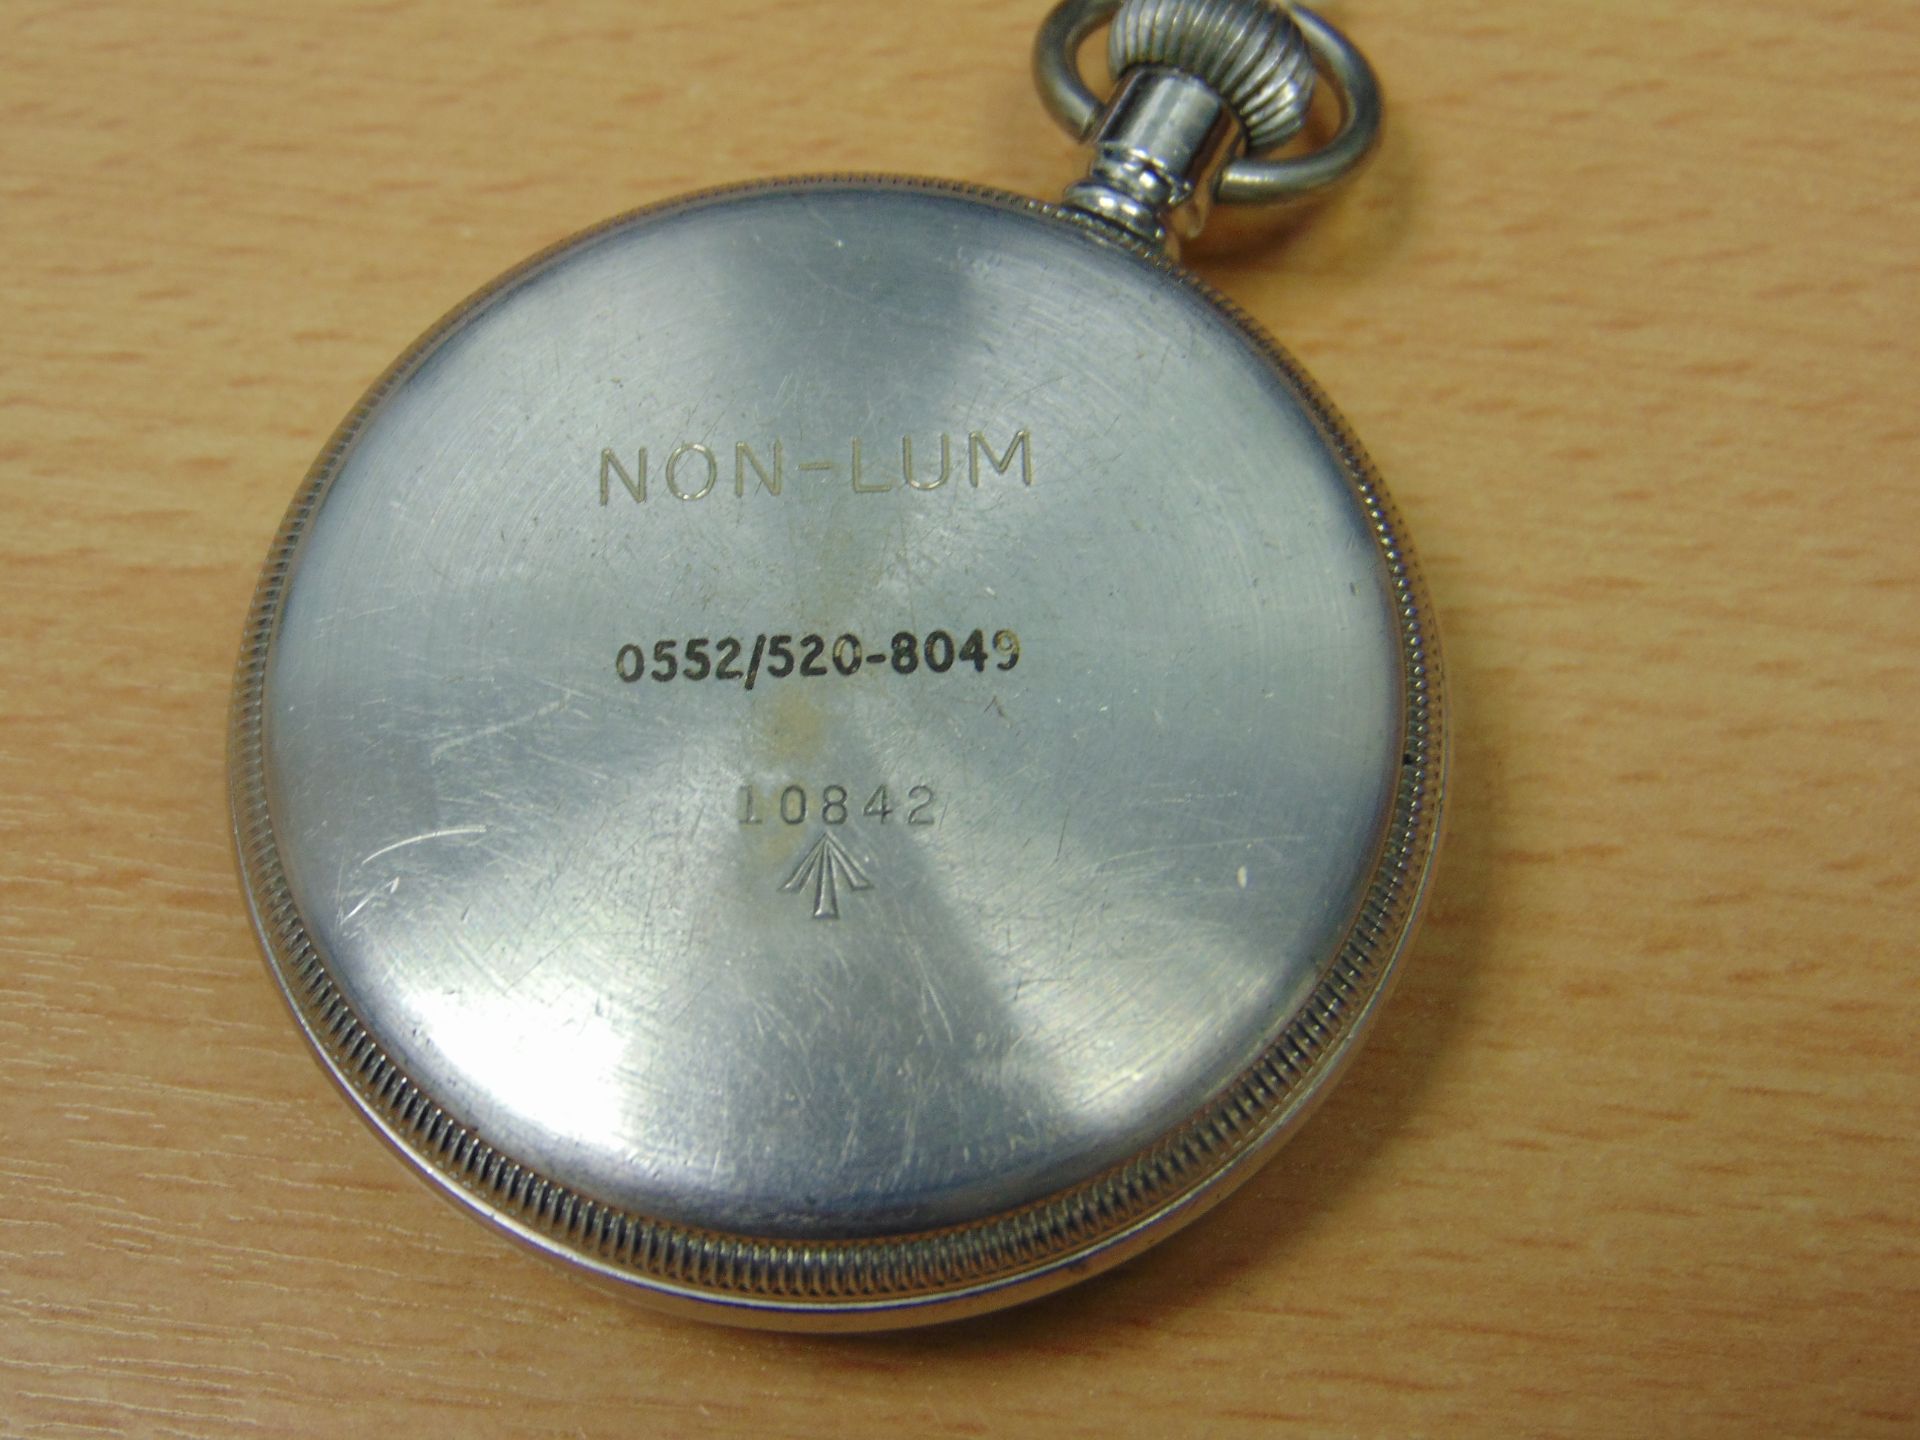 VERY RARE NON LUMINOUS WALTHAM NAVY ISSUE SERVICE WATCH - Image 3 of 5